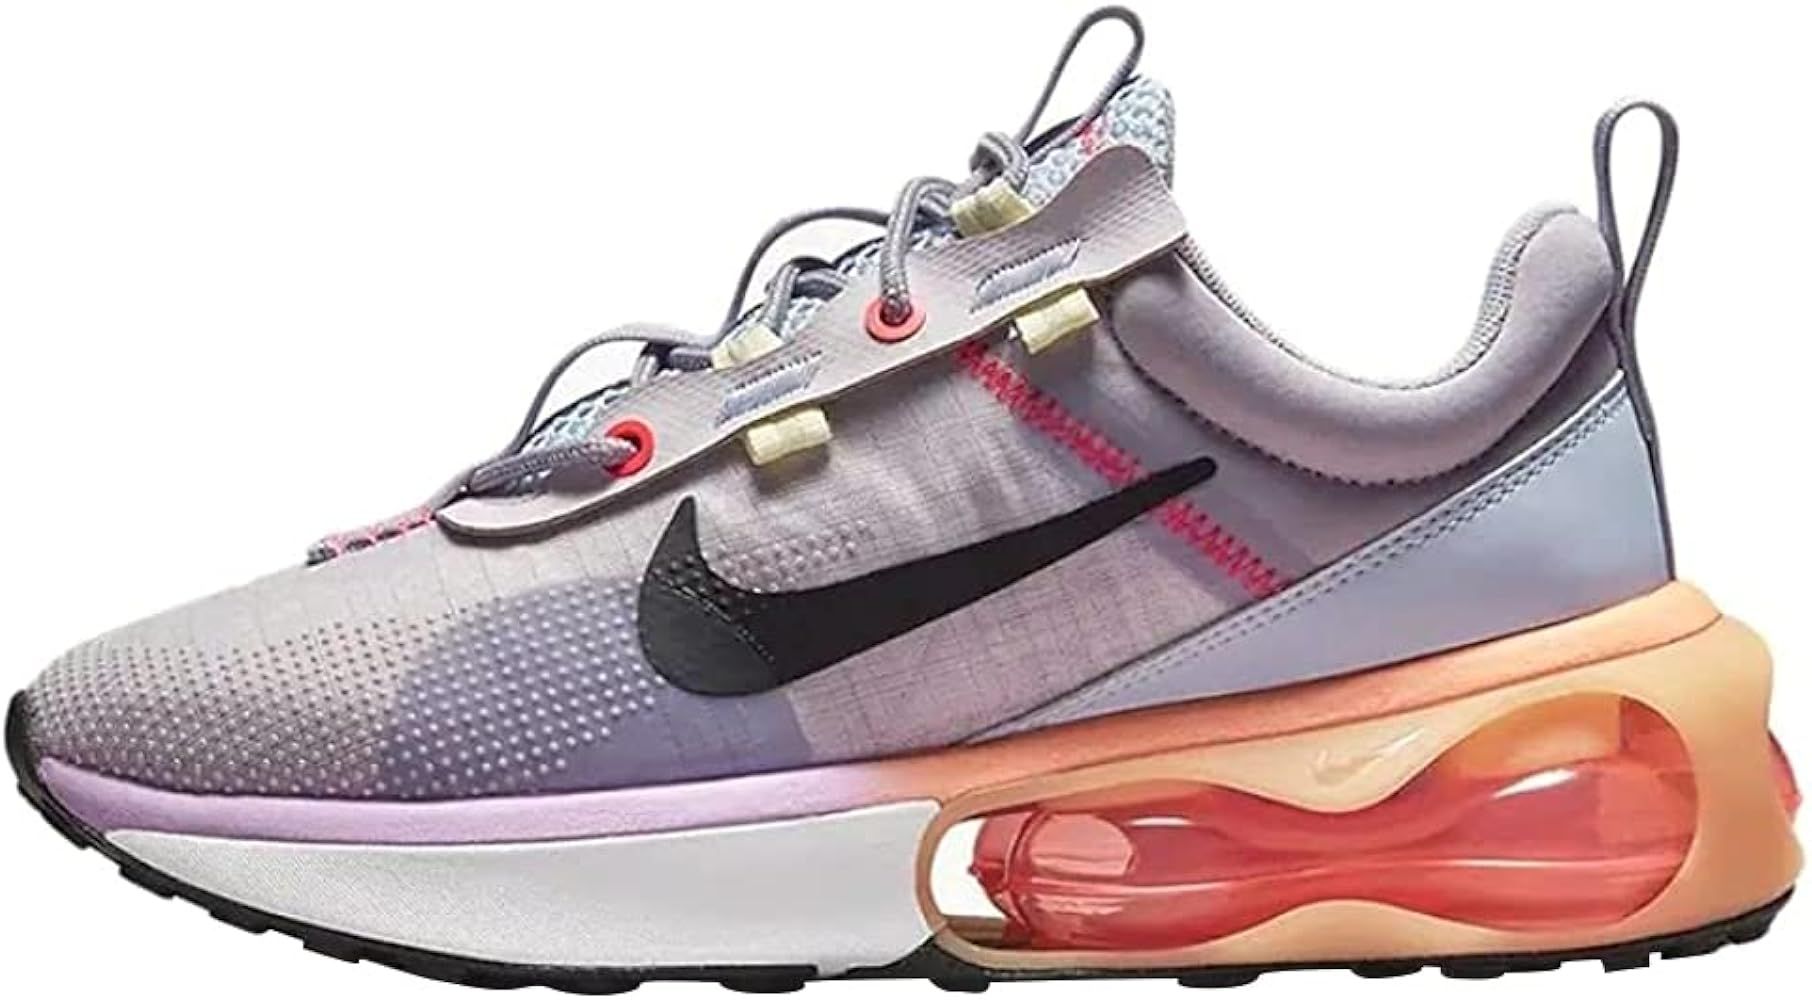 Nike Air Max 2021 Womens Running Trainers Da1923 Sneakers Shoes | Amazon (US)